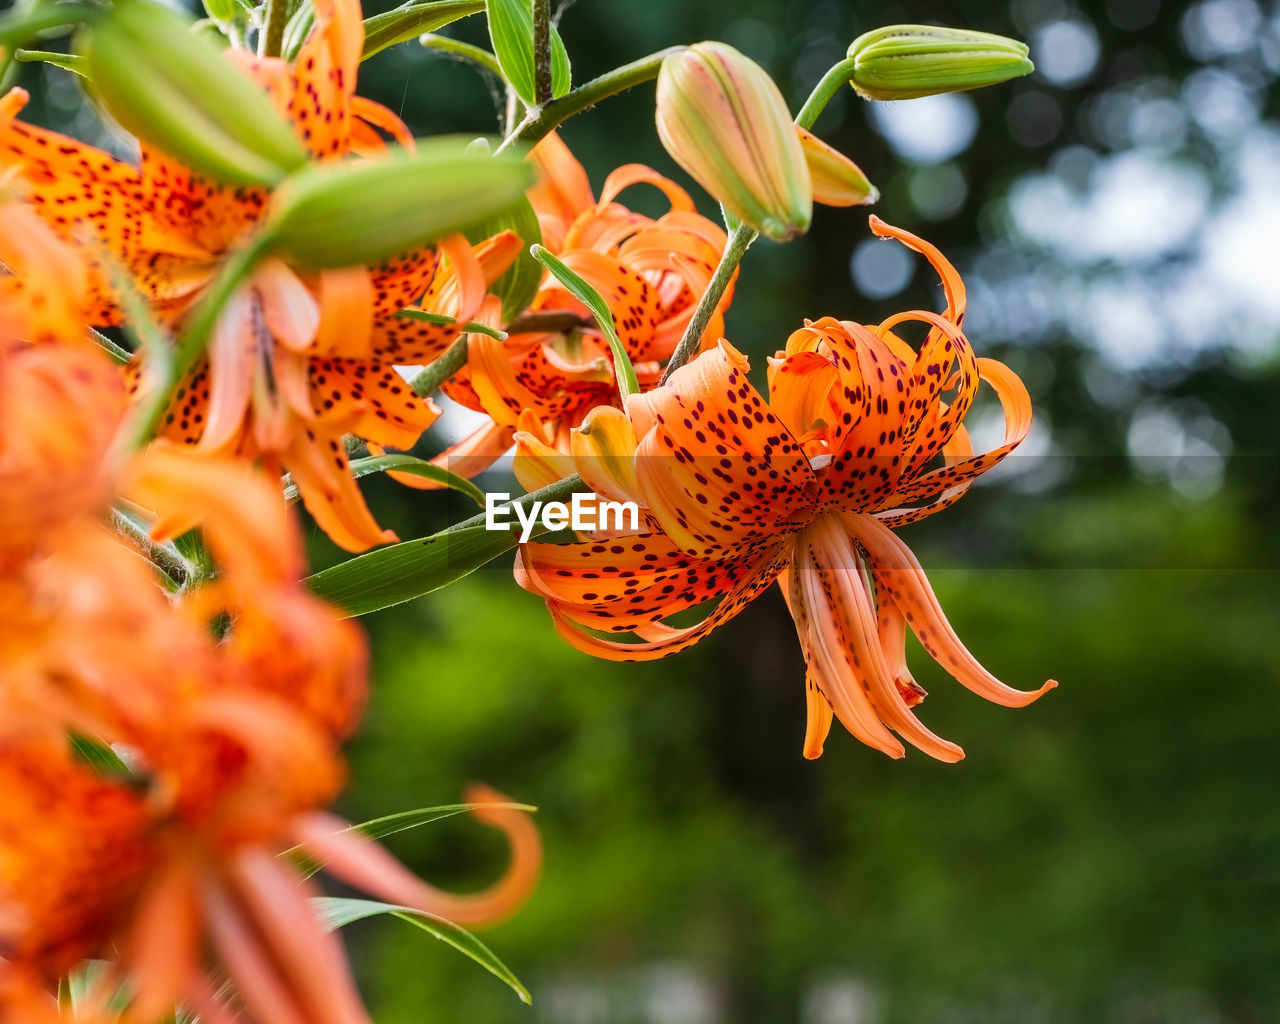 plant, flower, beauty in nature, orange color, flowering plant, nature, lily, growth, macro photography, shrub, freshness, close-up, no people, animal wildlife, animal themes, petal, animal, outdoors, flower head, selective focus, fragility, wildflower, botany, yellow, autumn, leaf, wildlife, plant part, food